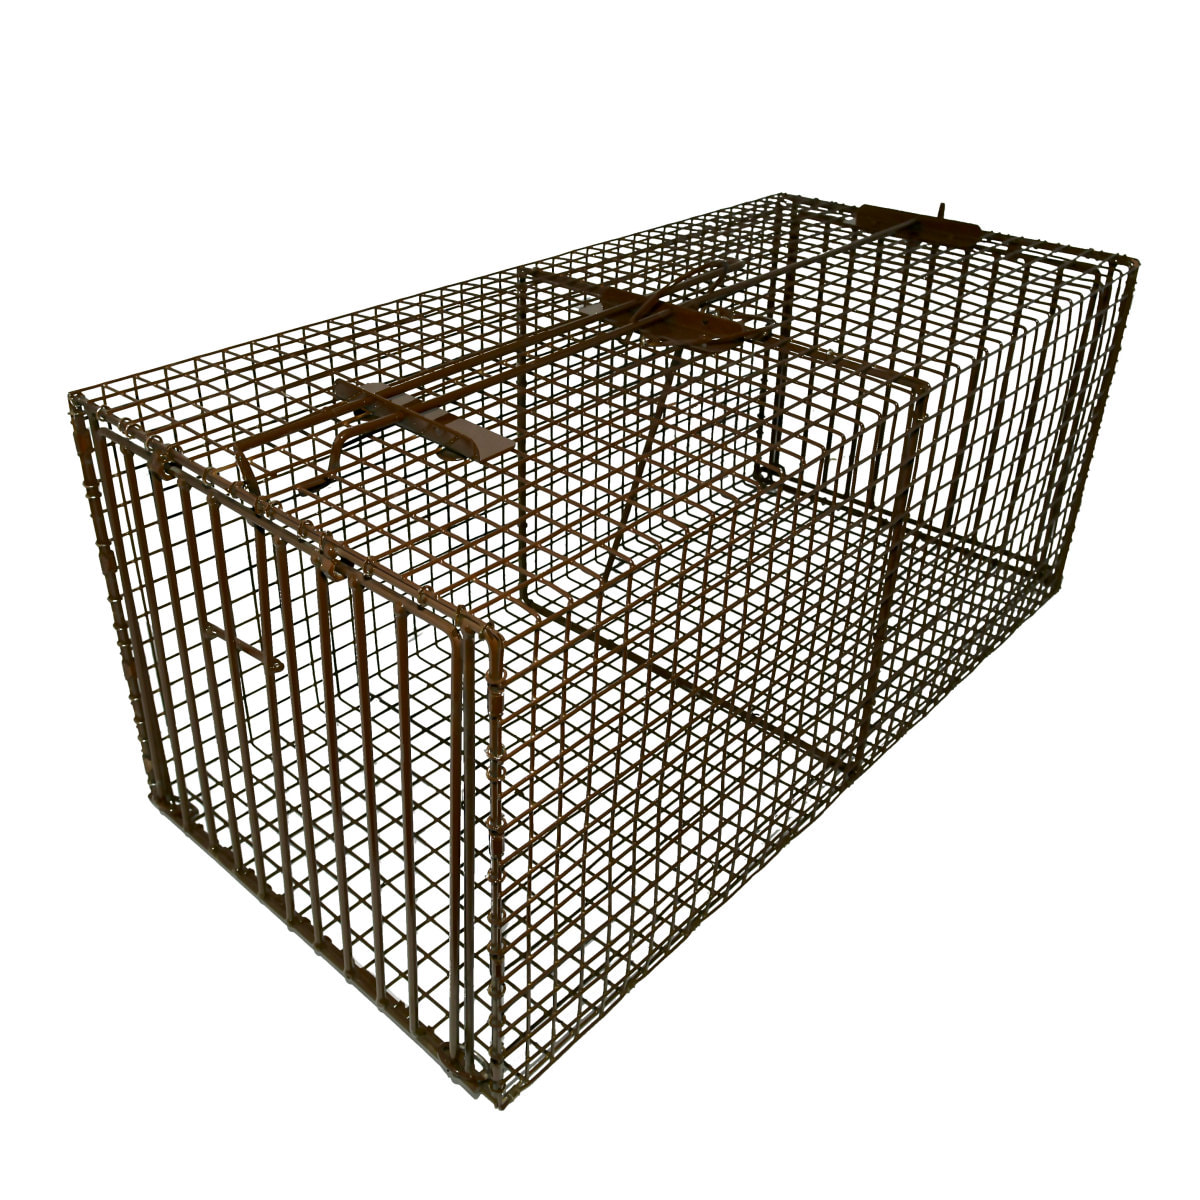 Beaver Cage Double Door Pro, Live Cage Trap